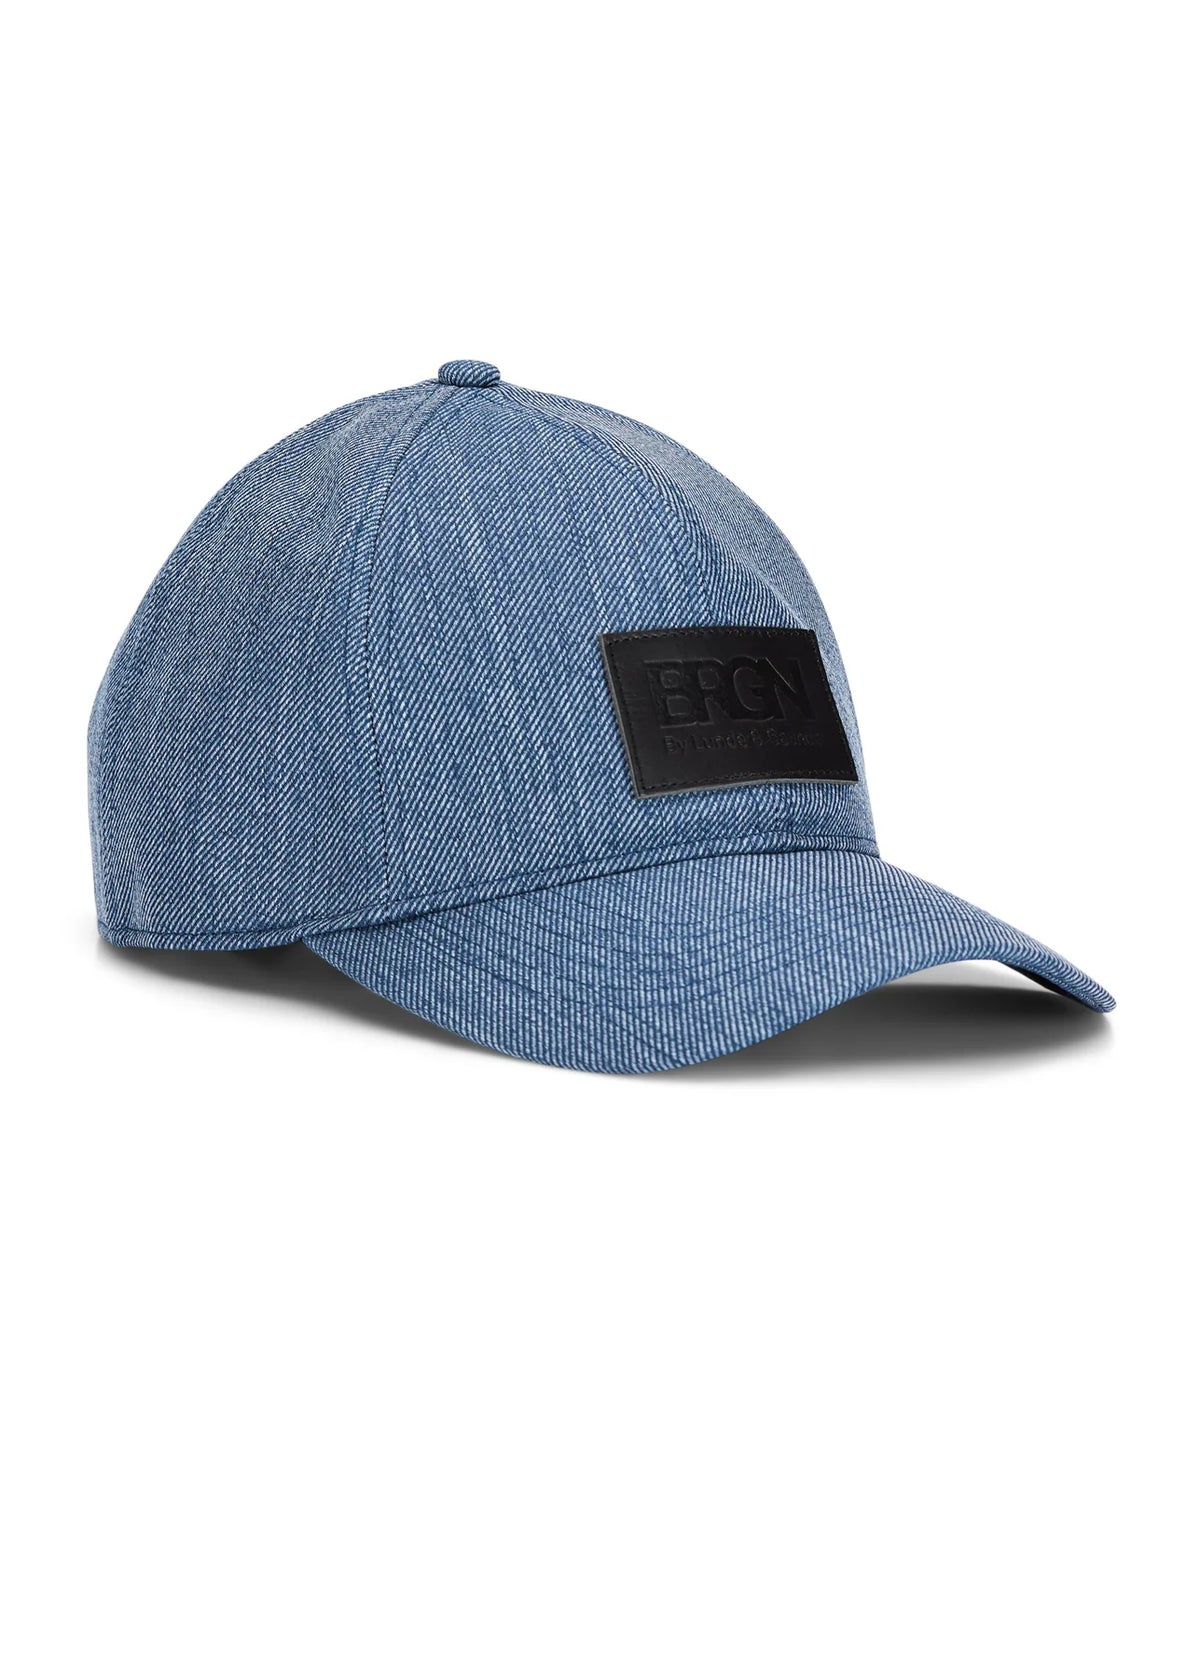 Recycled polyester denim look cap